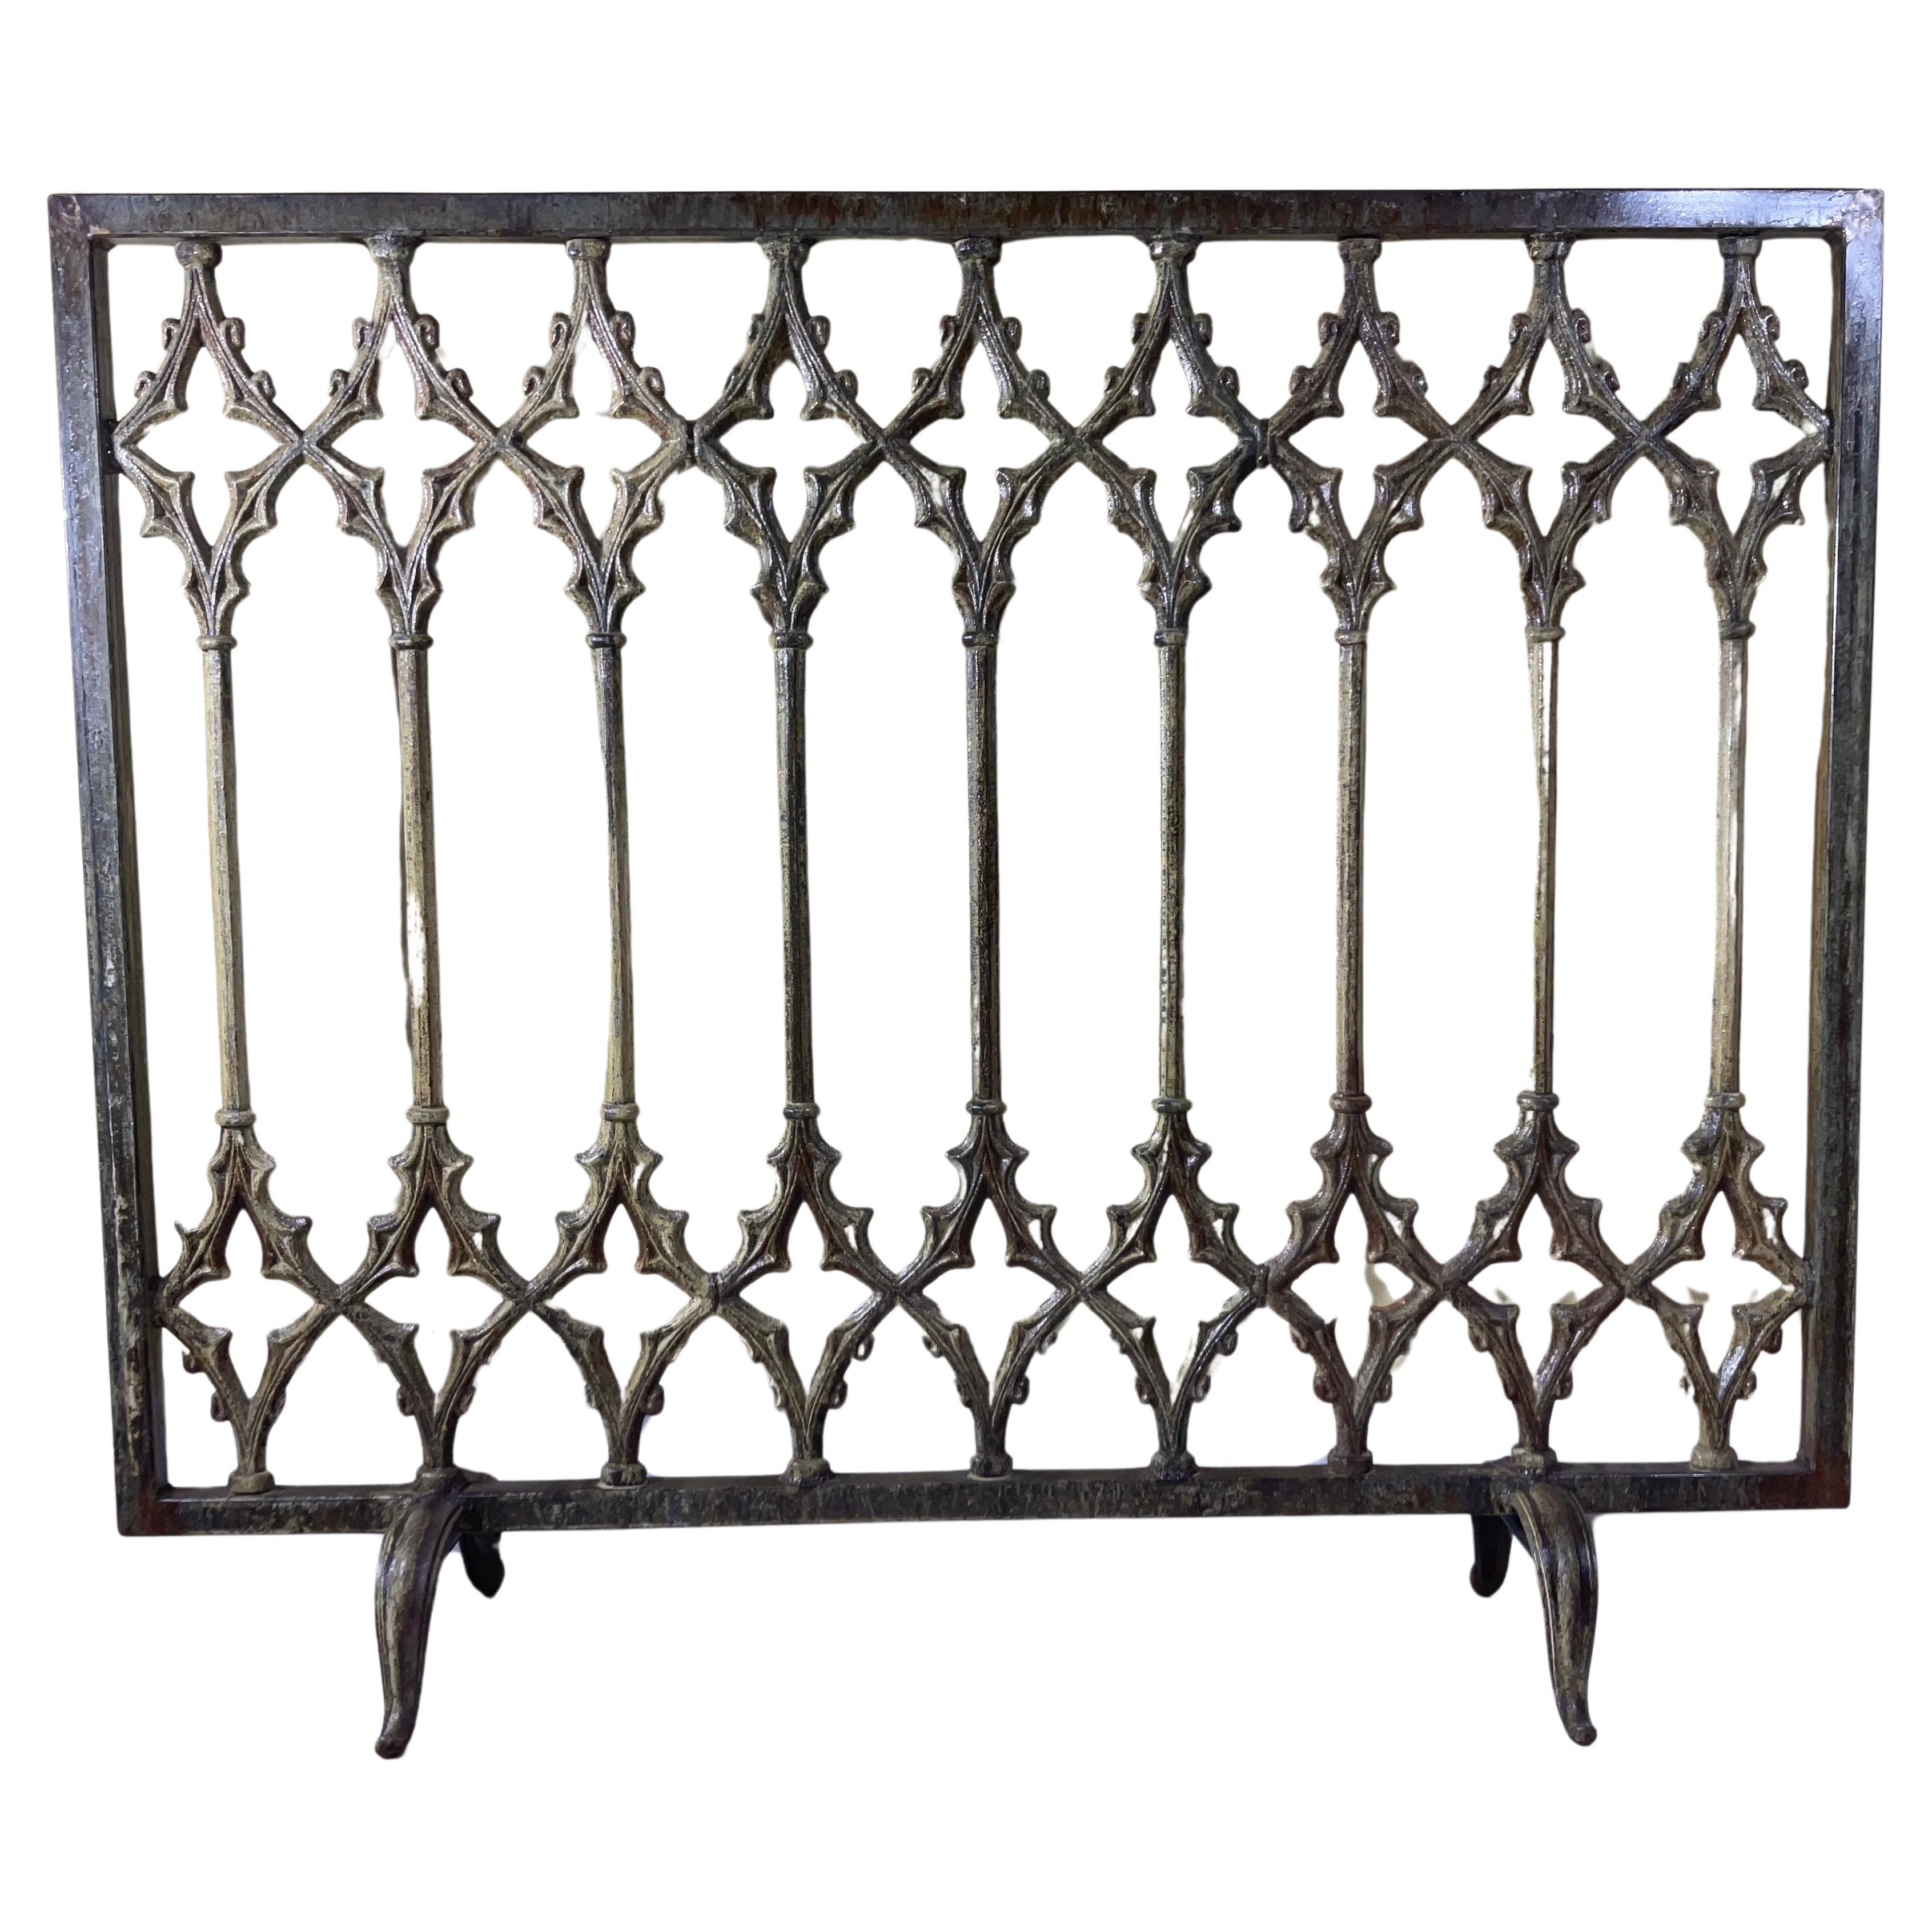 Large Cast Iron Fireplaces Screen For Sale